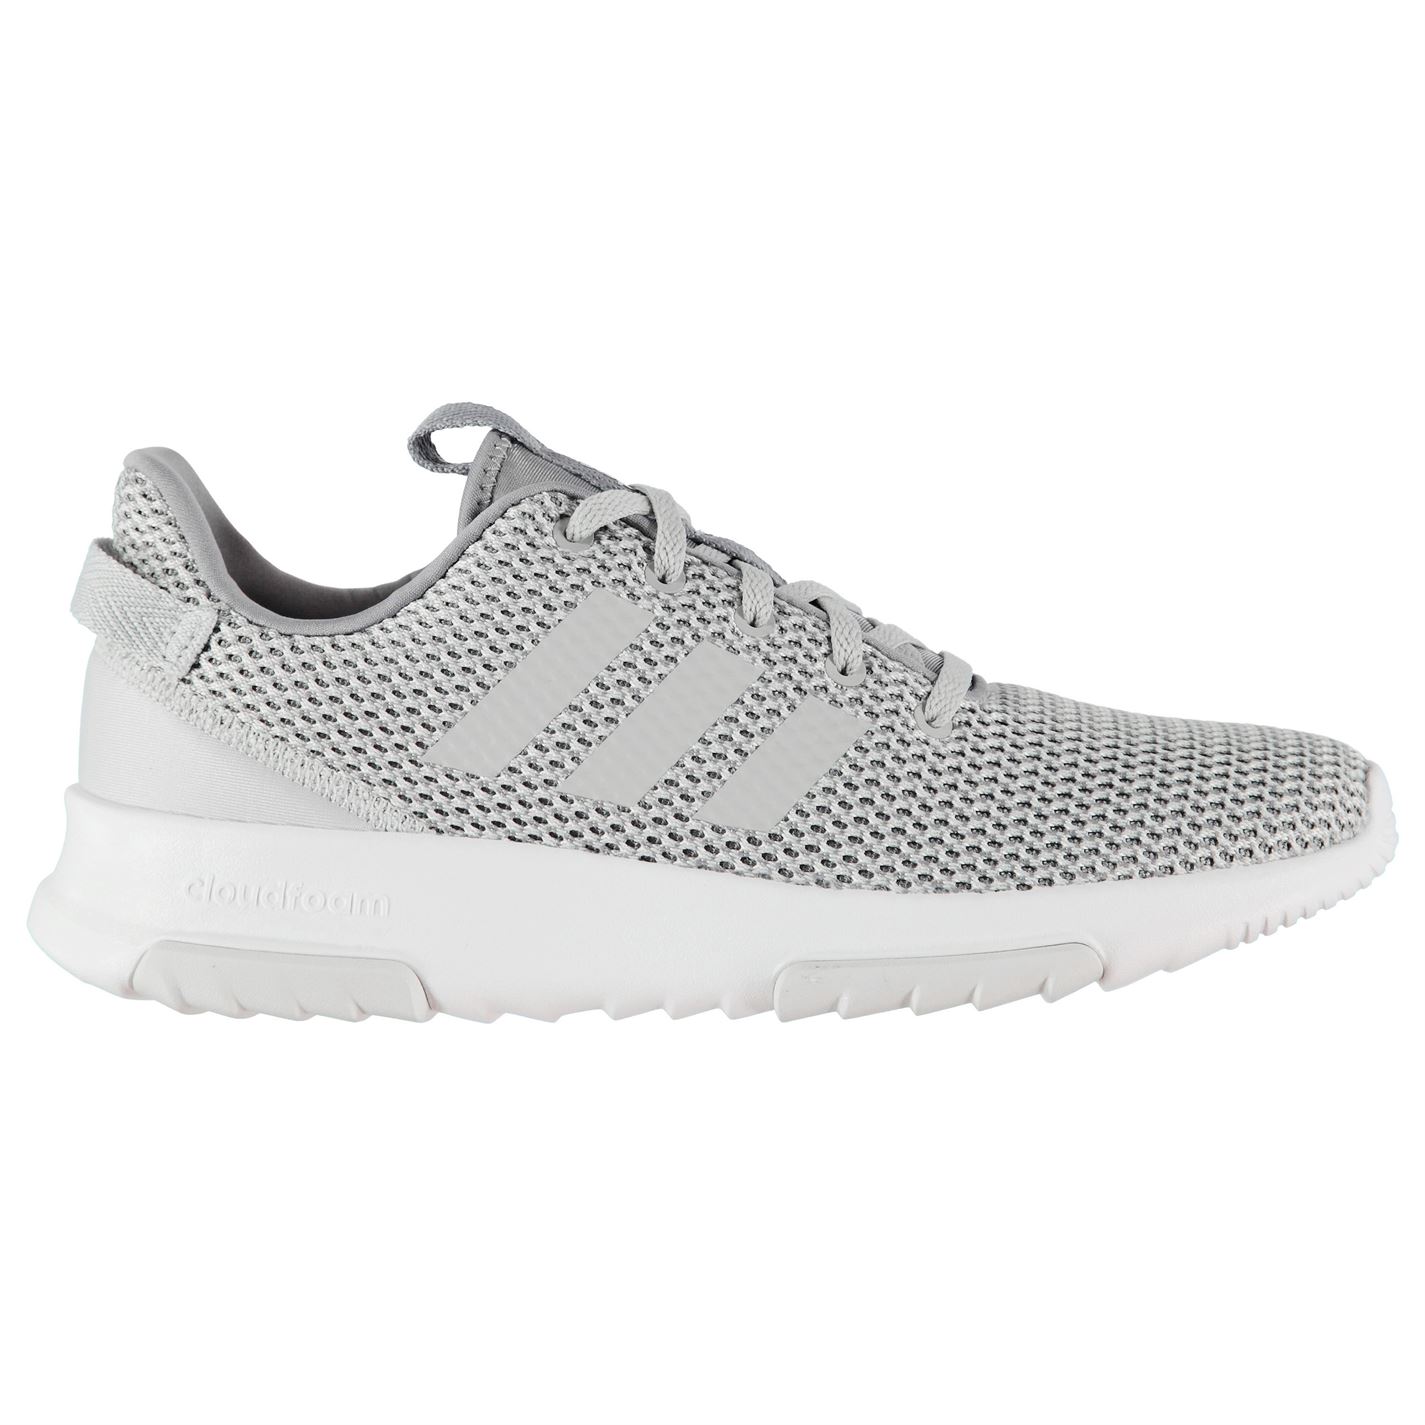 adidas cloudfoam racer trainers